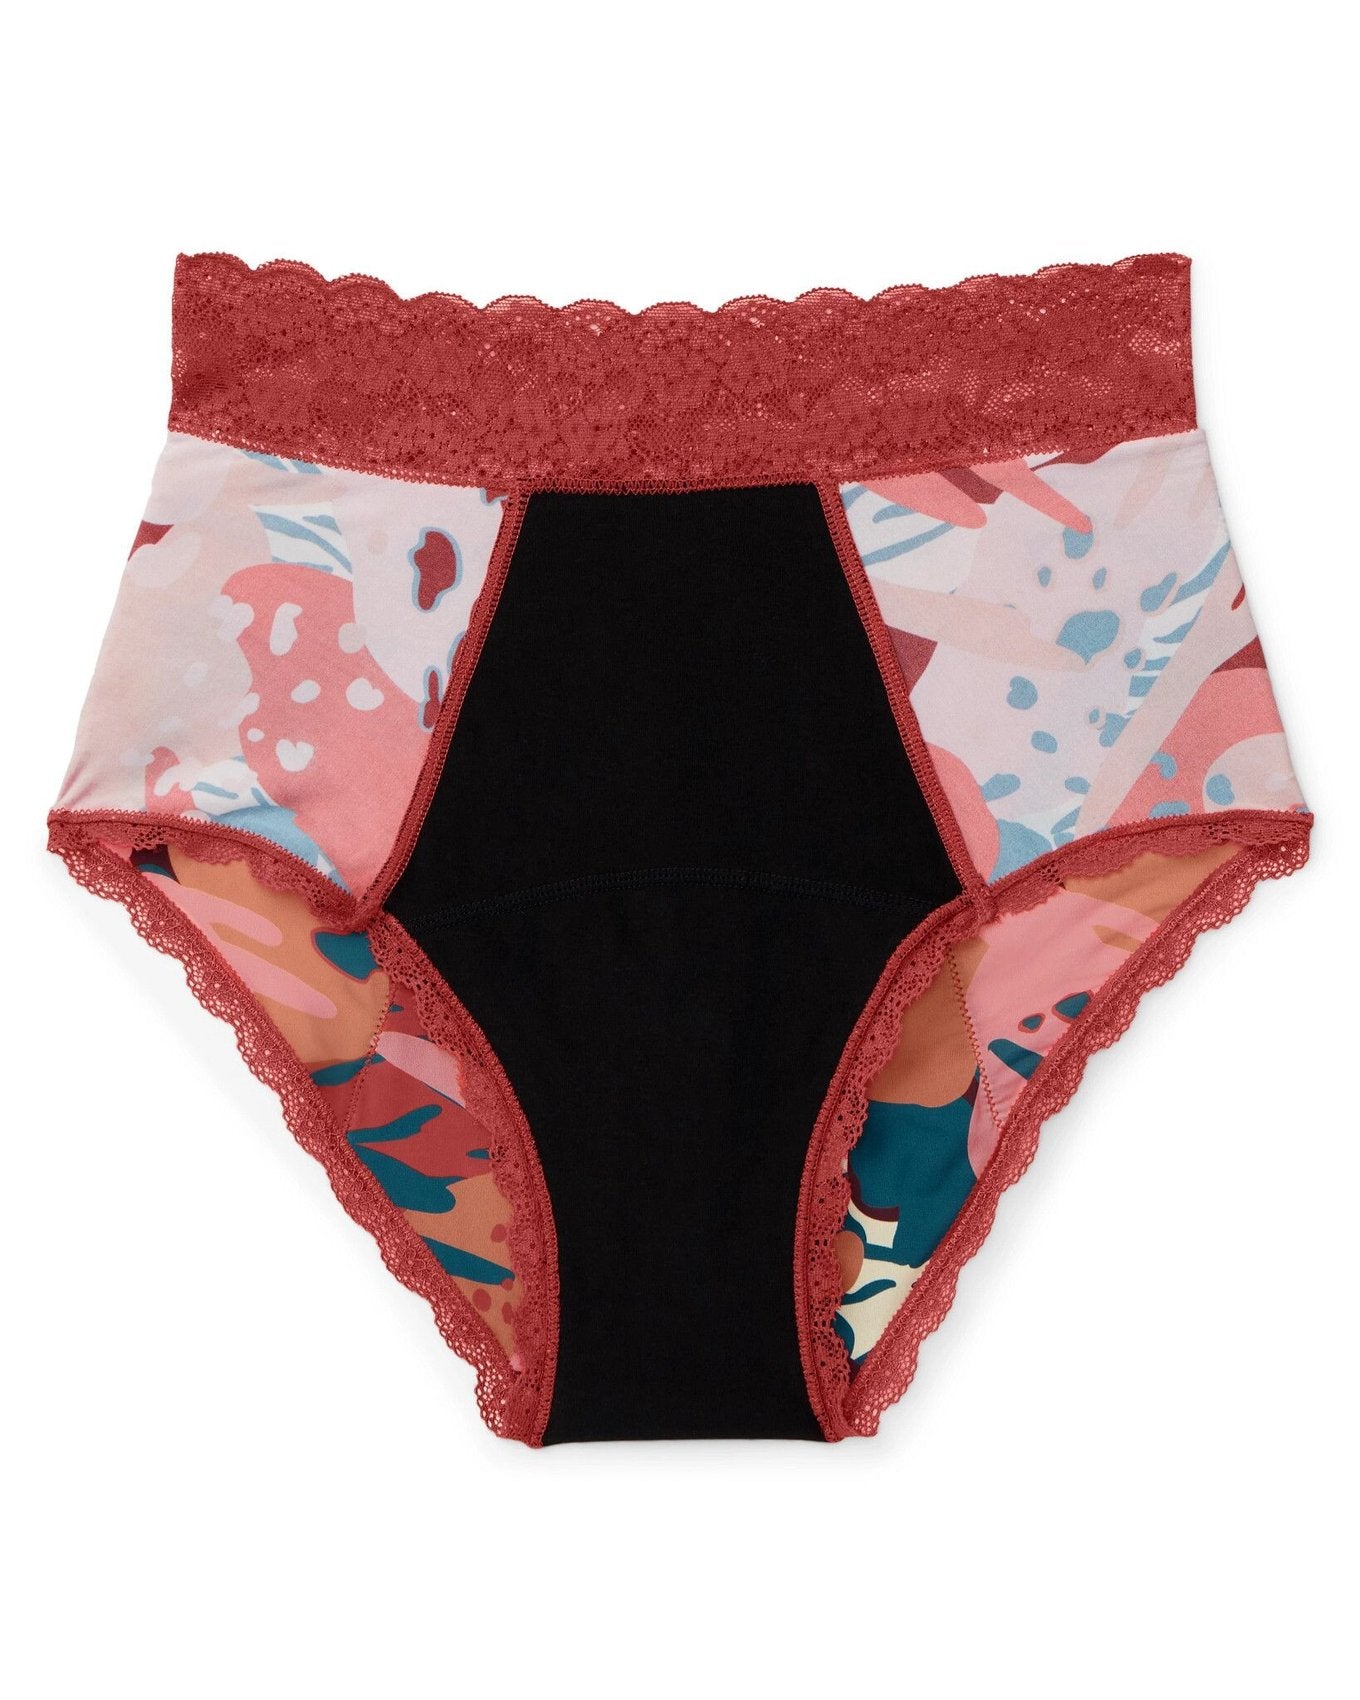 Emily Shortie Floral Red Plus Period Panties, 0X-4X